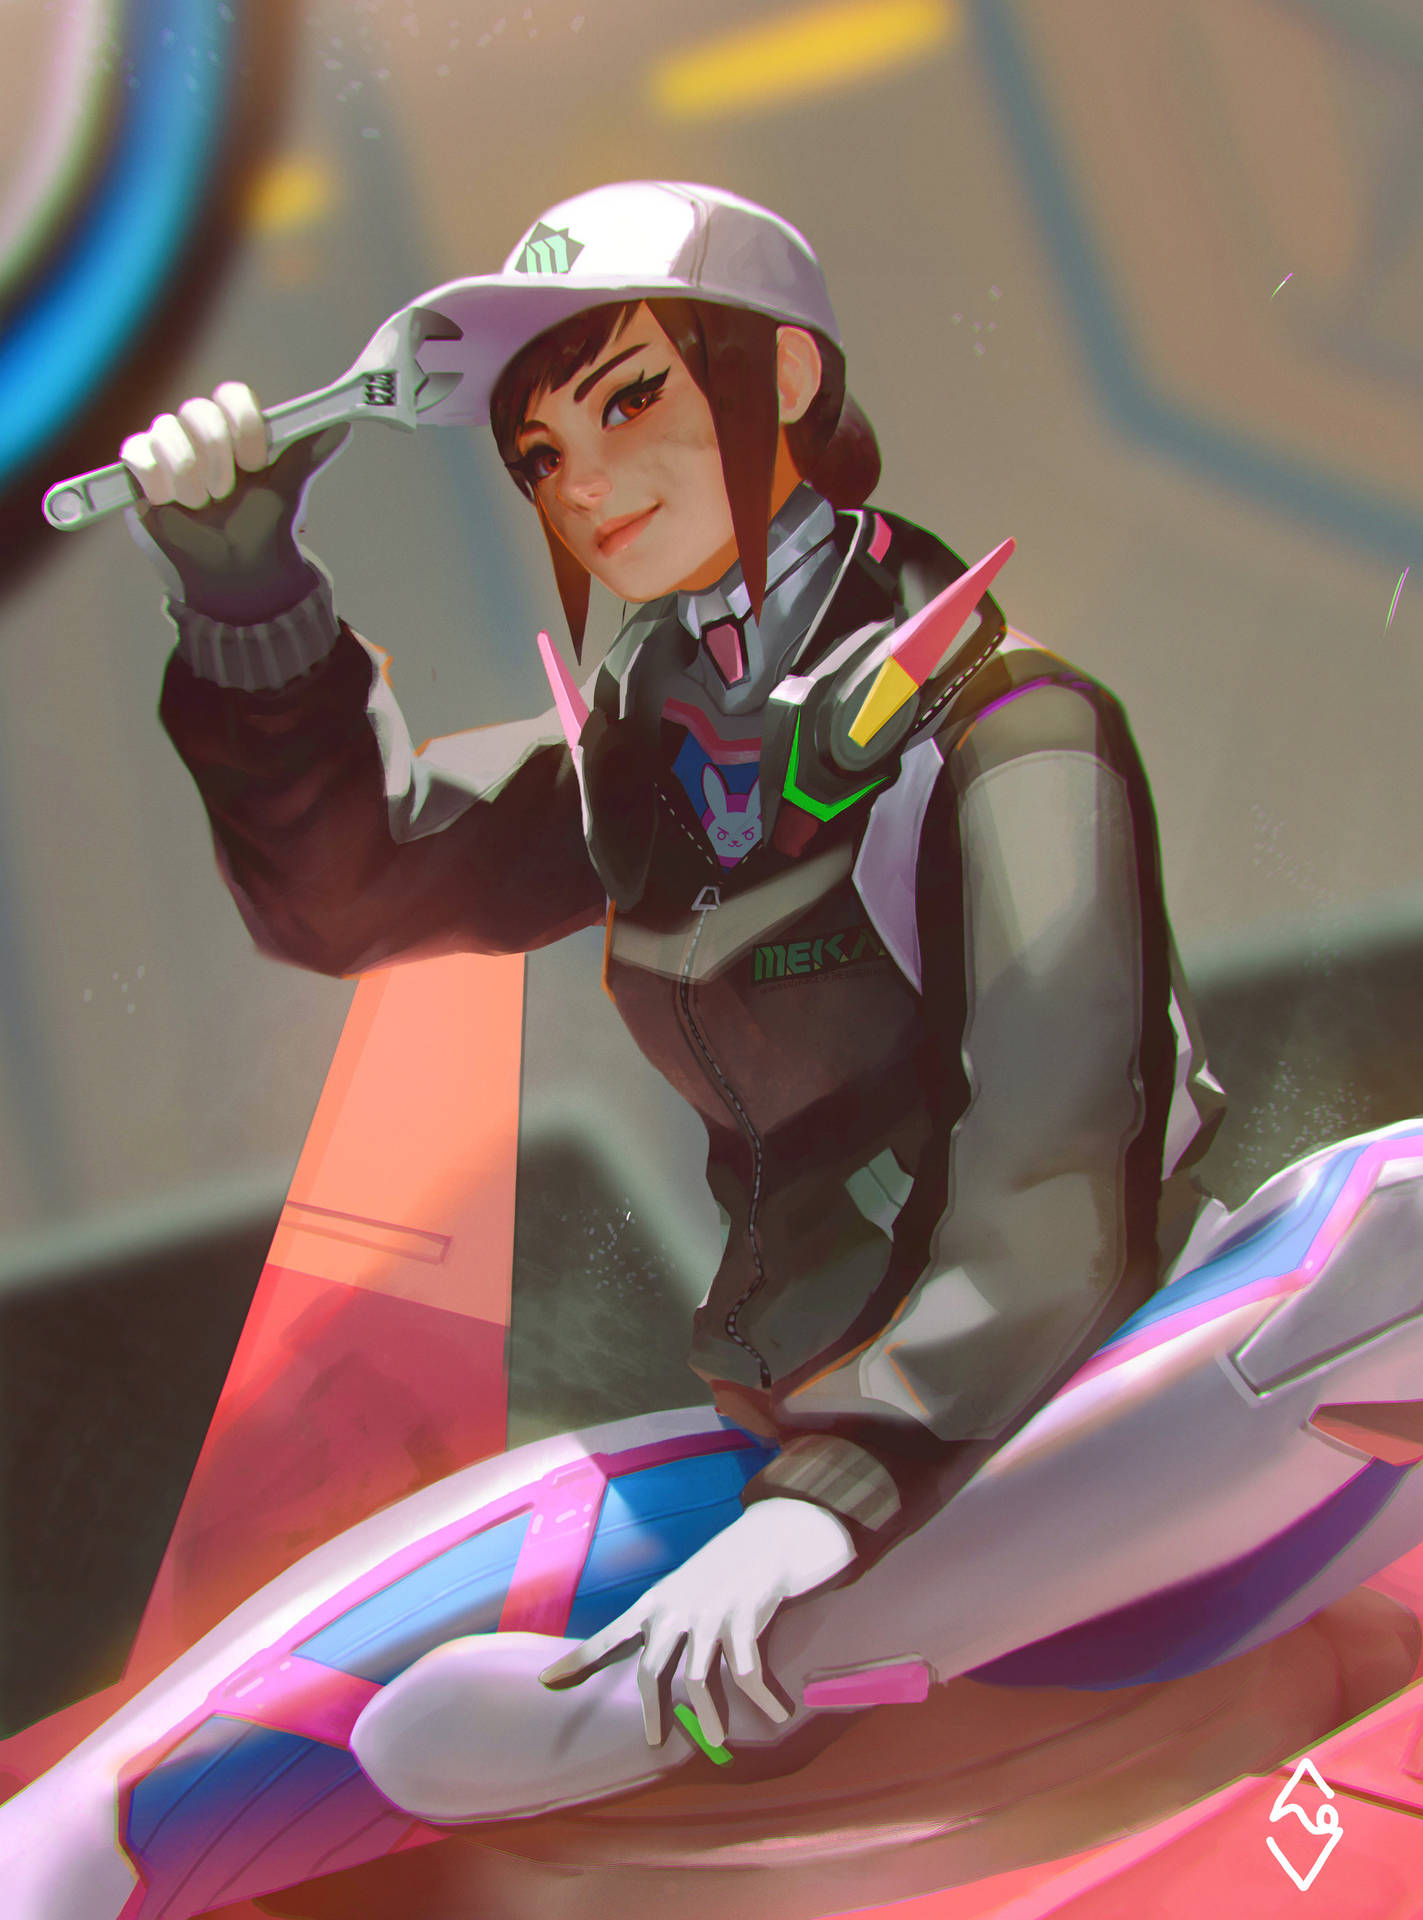 Dva, the highly skilled and technologically advanced Mech Warrior Wallpaper